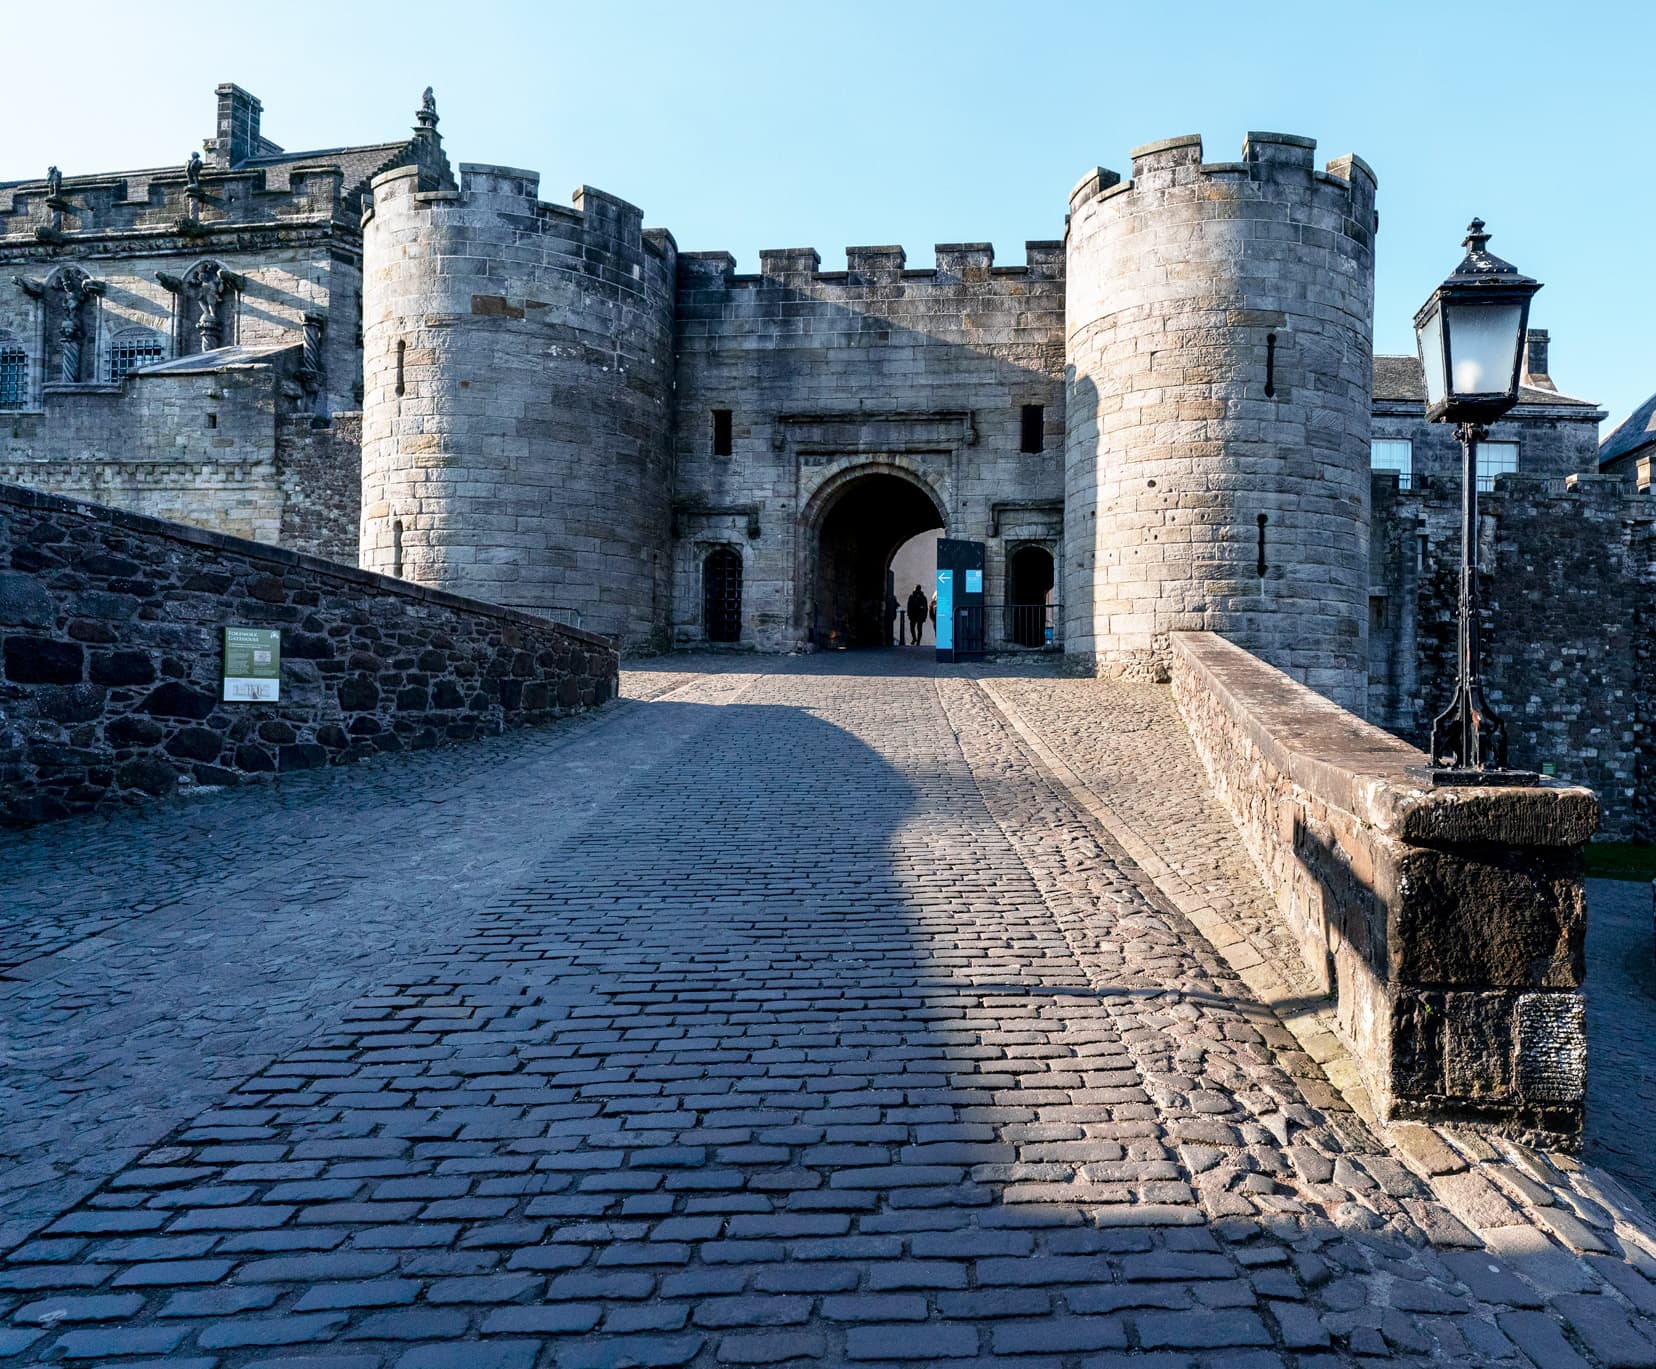 Scotland Castle Tours - Gates and round turrets of Stirling Castle